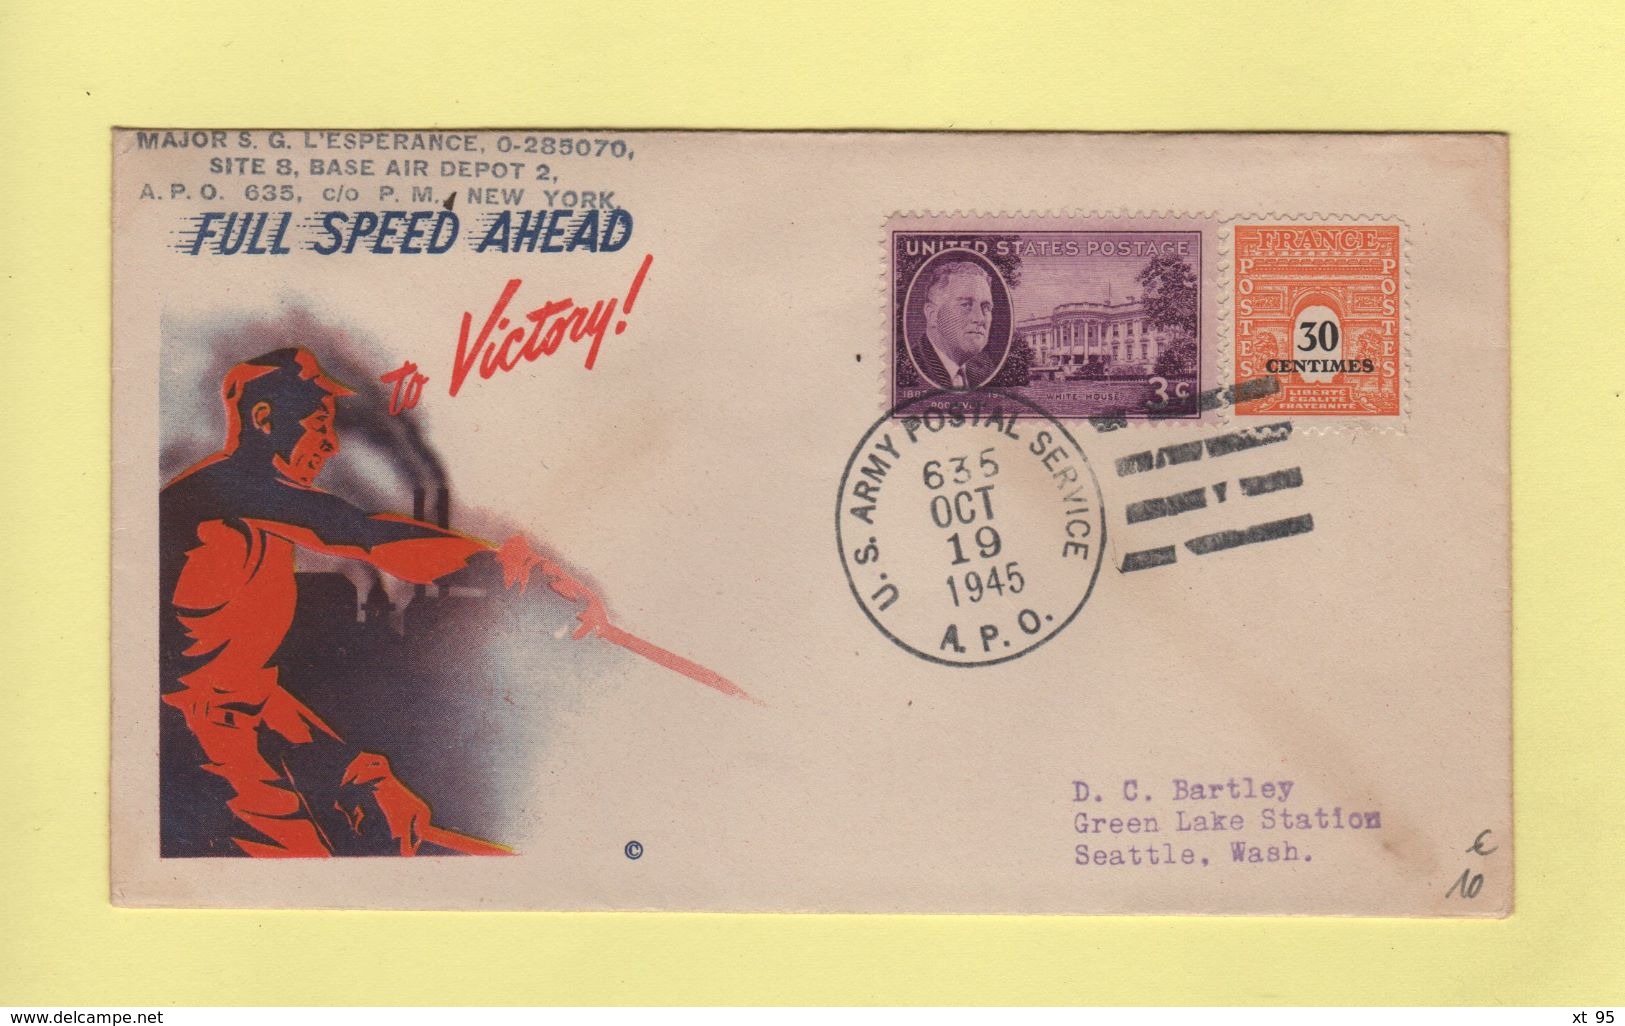 APO 635 - US Postal Army Service - 19 Oct 1945 - Mixte US France - Full Speed Ahead For Victory - Oorlog 1939-45